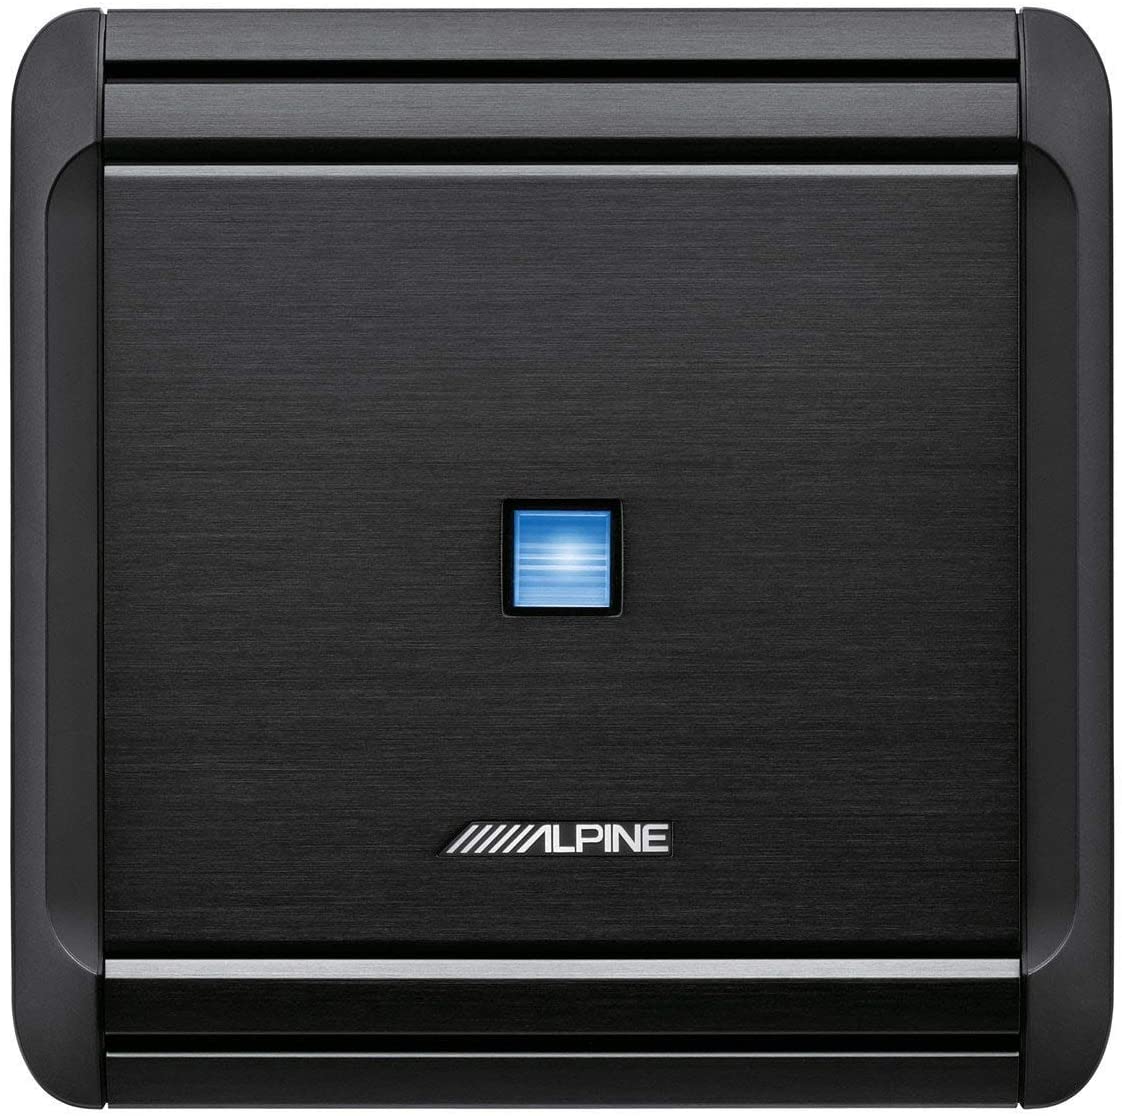 Alpine MRV-F300 Compact 4-Channel Amplifier with 4 x 6.5" Car Speakers & Amp Kit